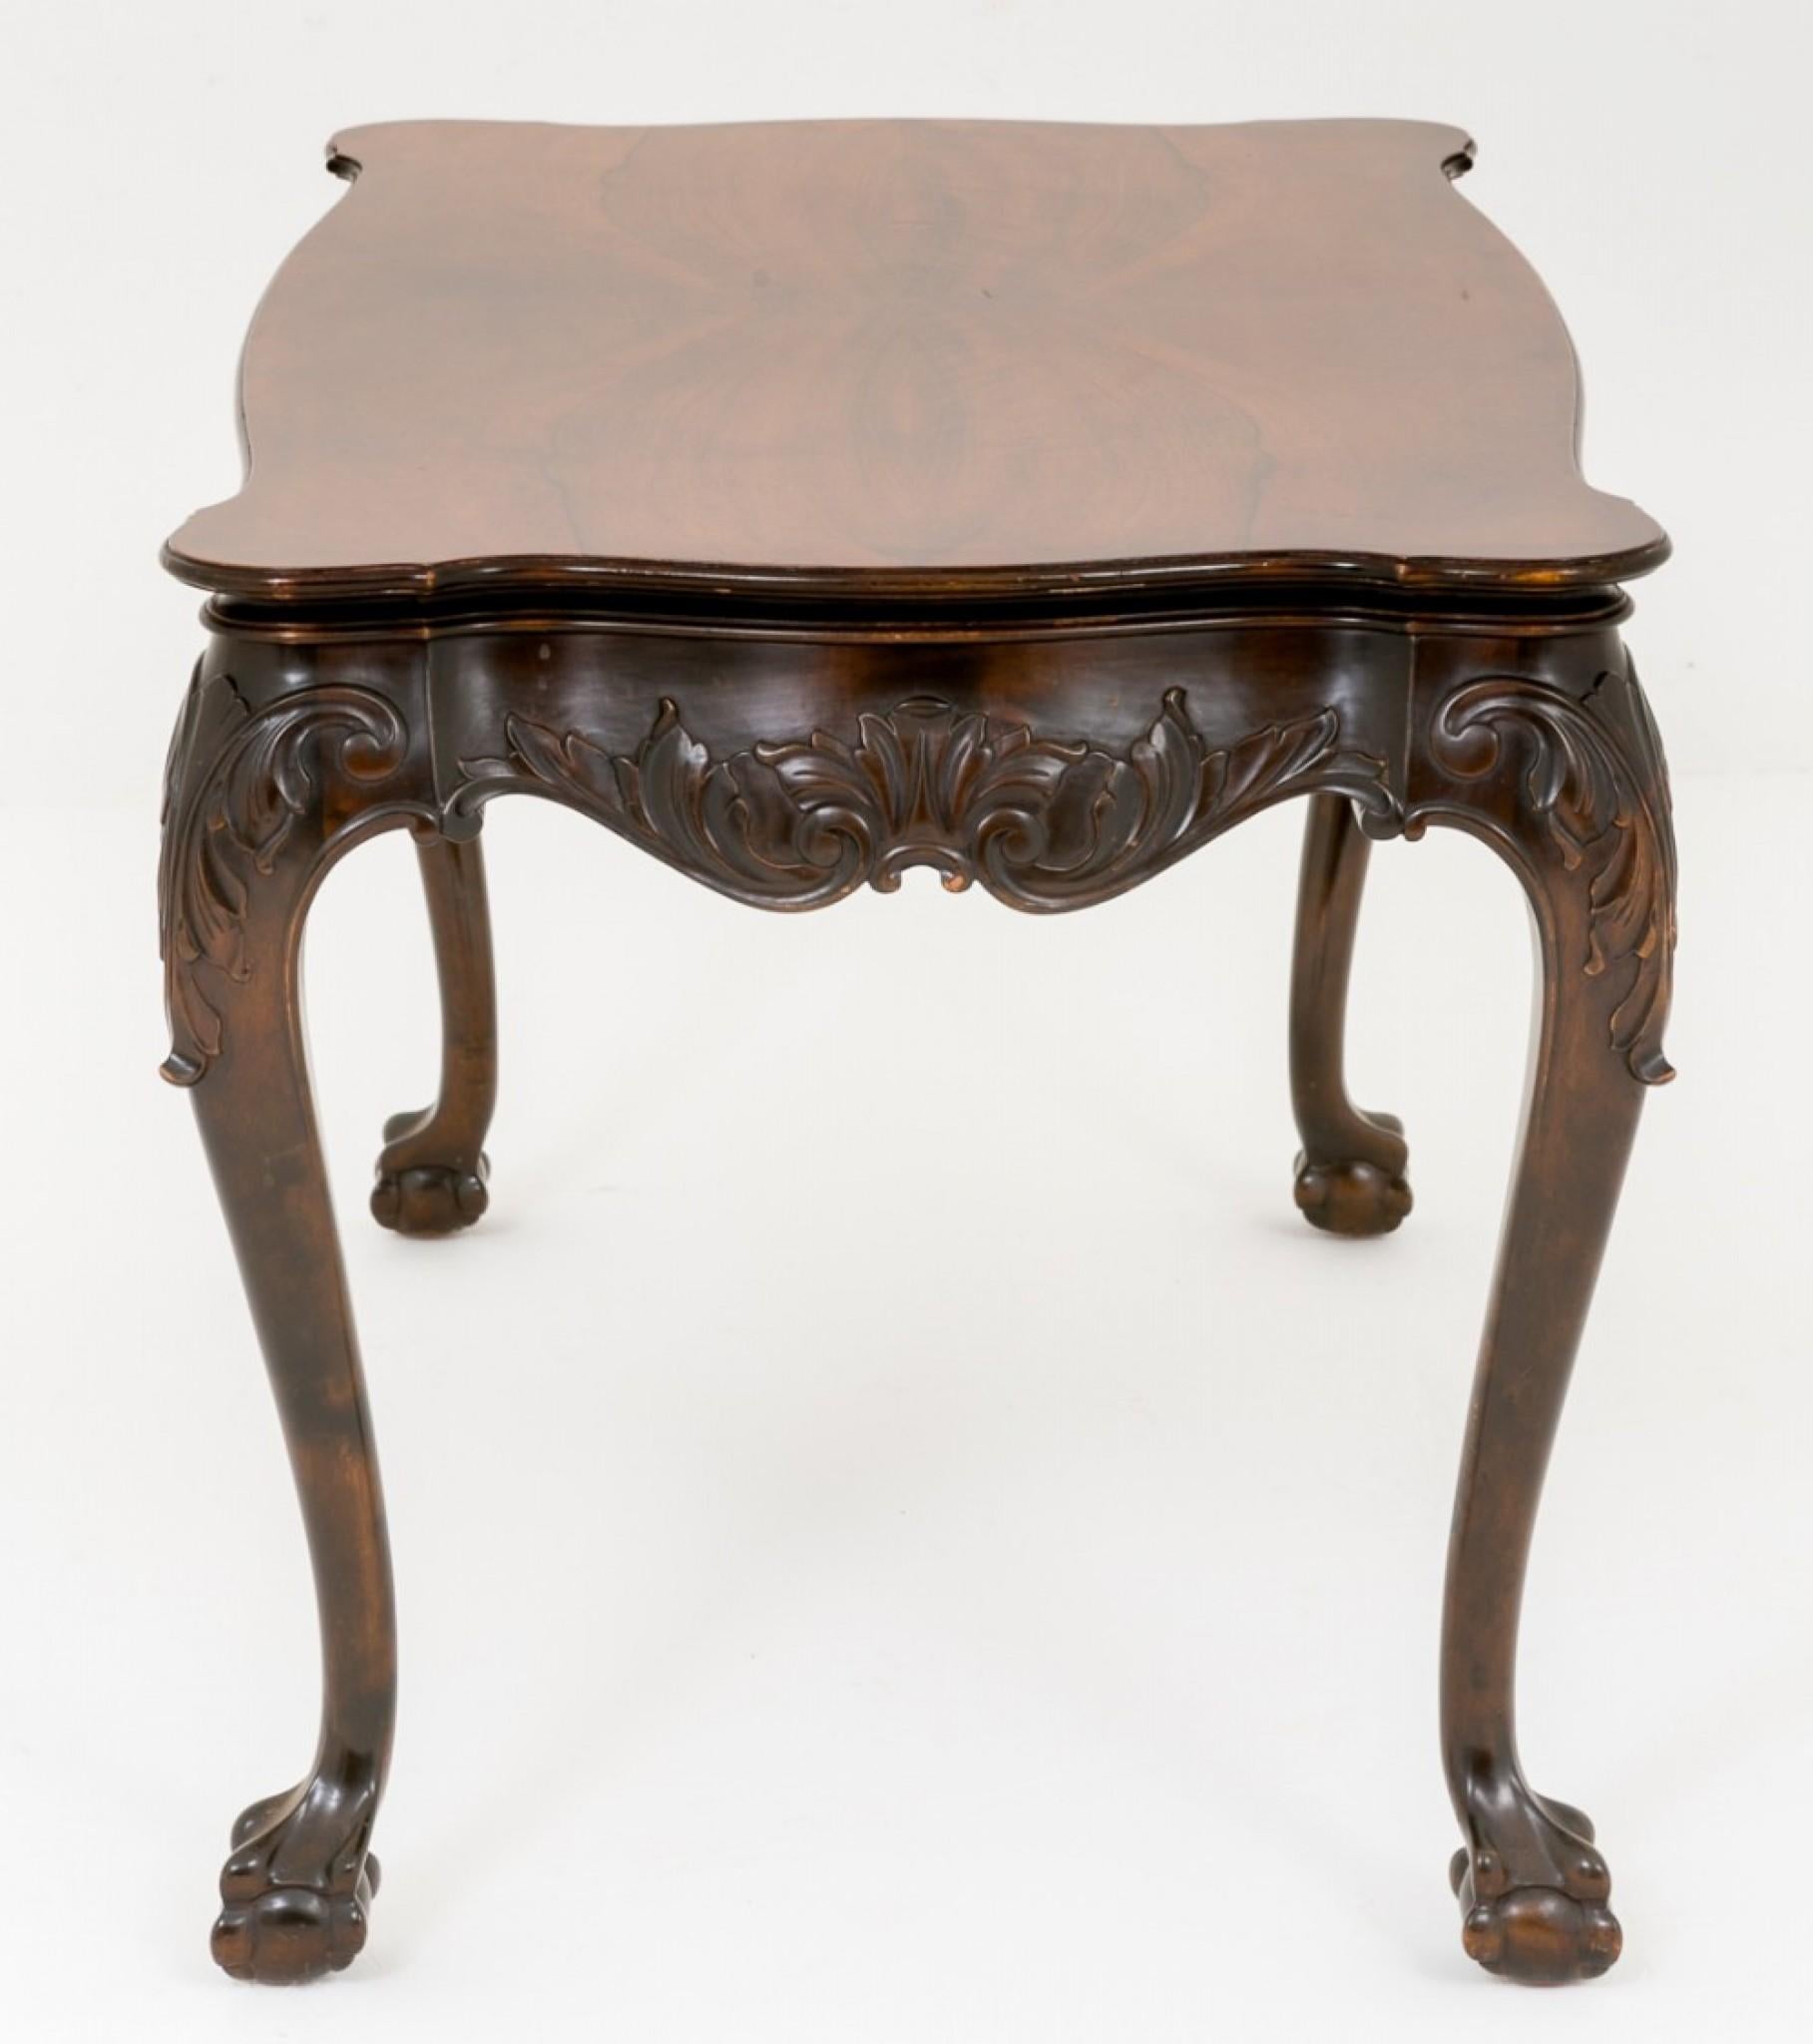 Pretty Mahogany Coffee Table in the Chippendale Style.
circa 1900
Standing on typical Chippendale style legs with boldly carved Ball and Claw feet.
The shaped frieze and knee featuring carved decoration.
The top of the table being highly figured.